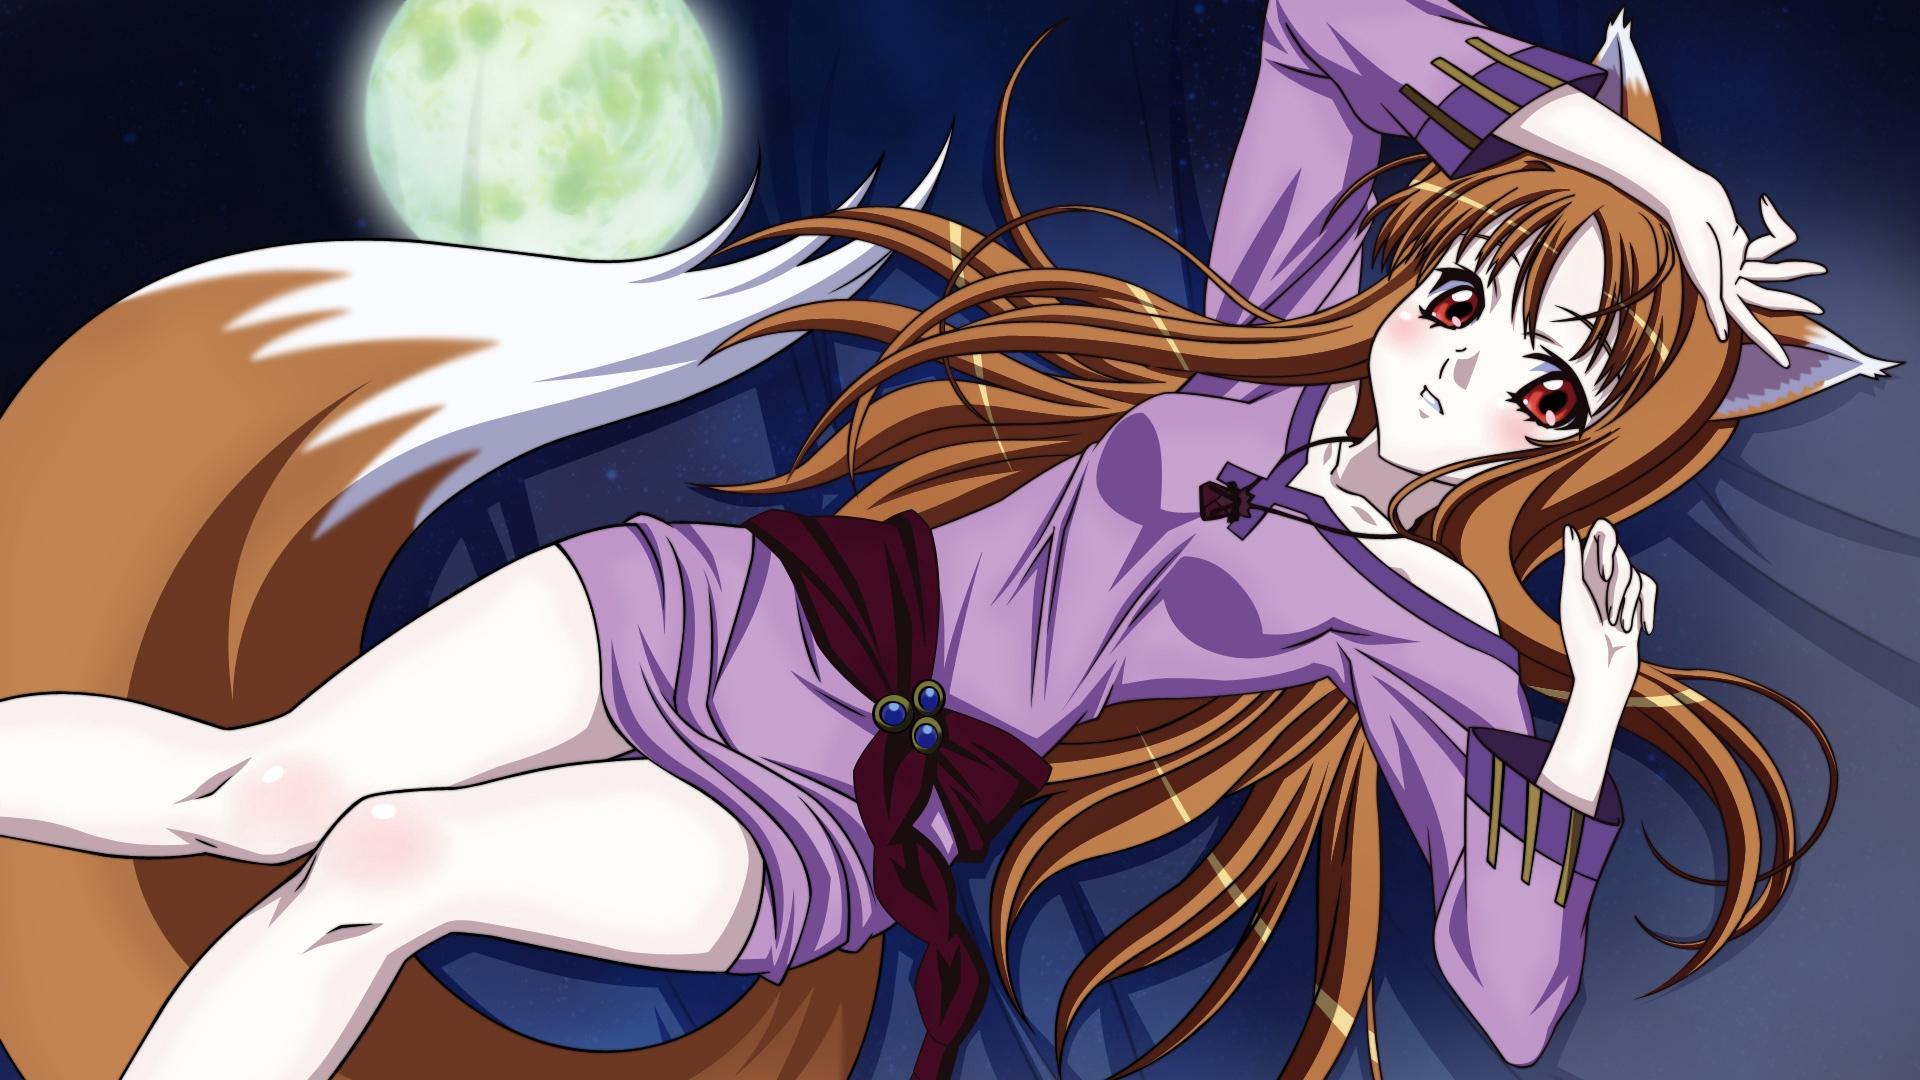 Download wallpaper 1920x1080 spice and wolf, girl, tail, pose, moon